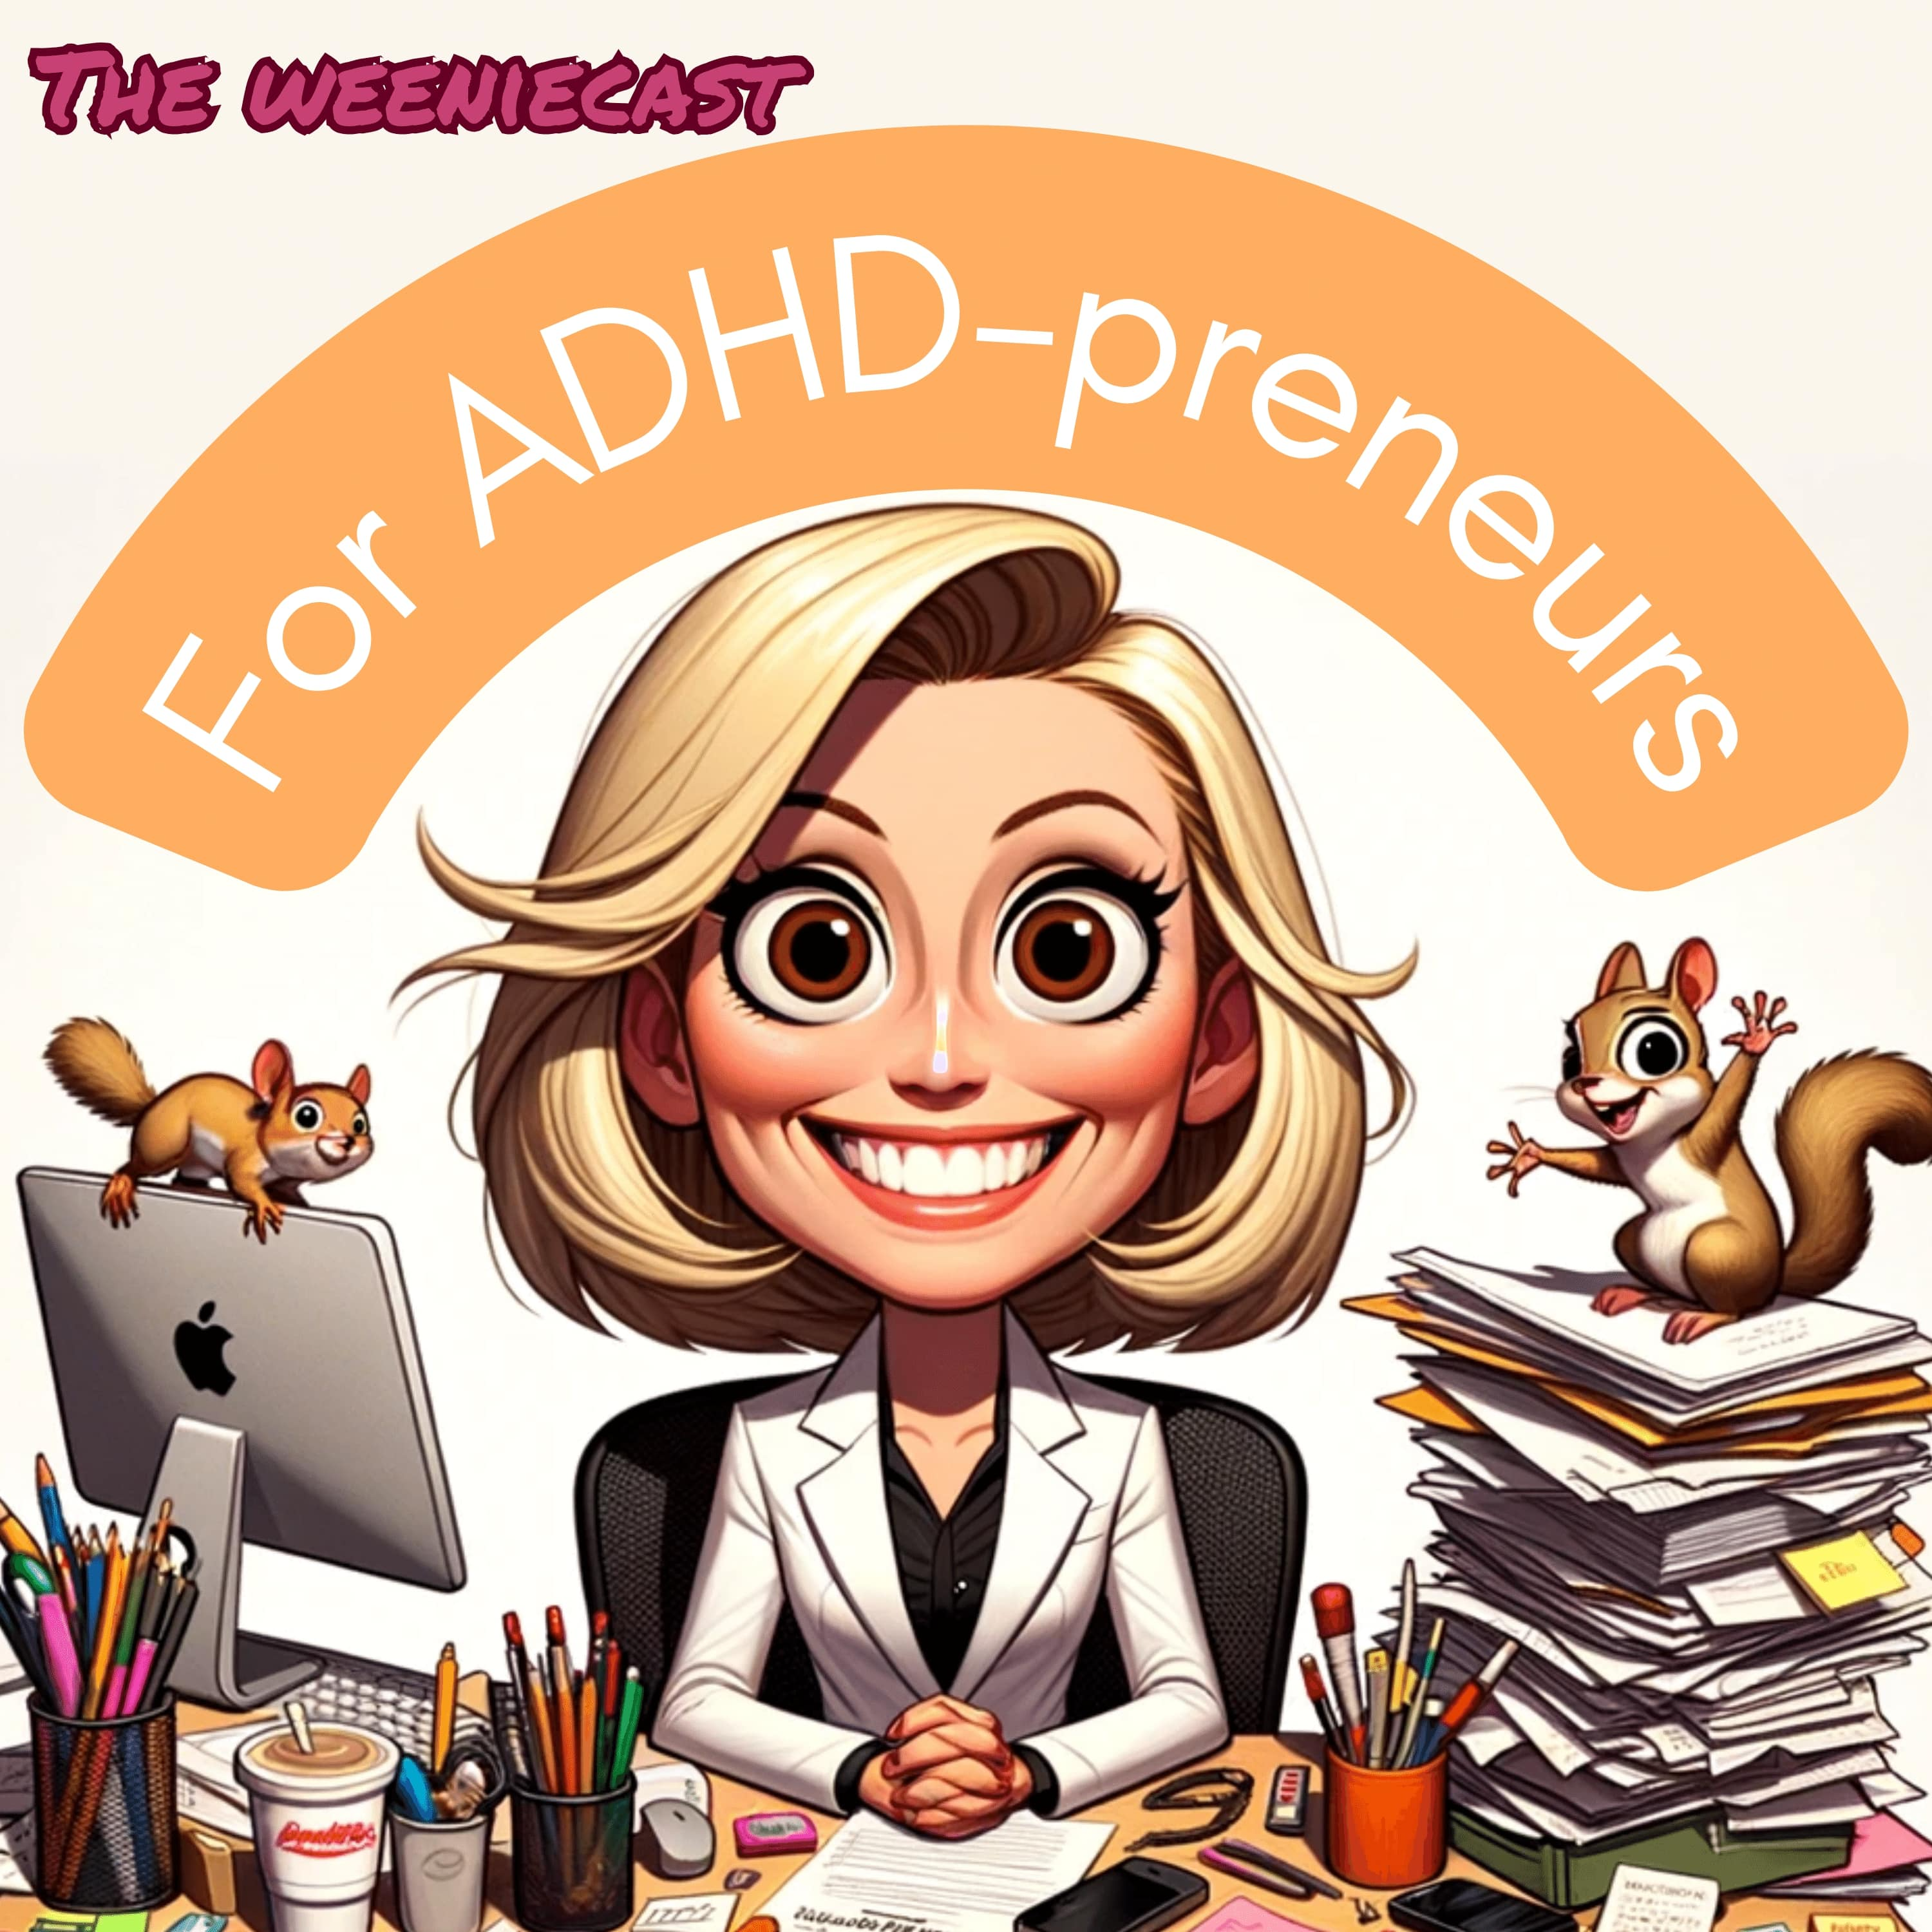 The Weeniecast for ADHD business owners